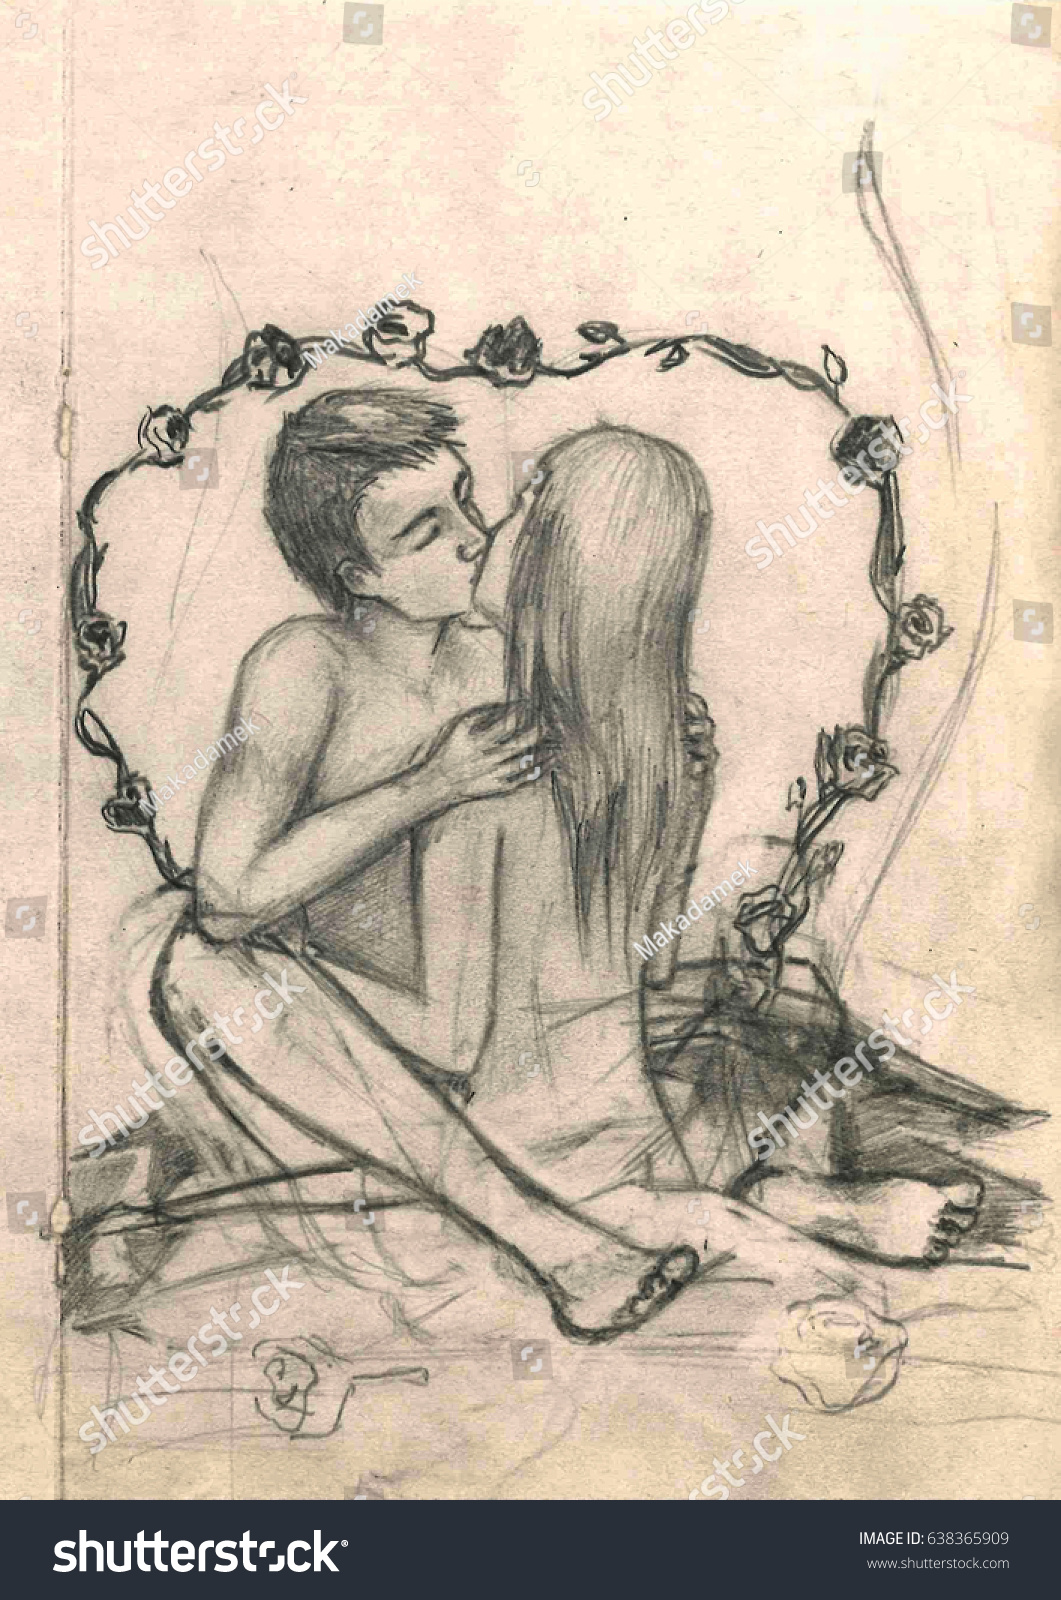 Drawings Of A Girl And Boy Kissing